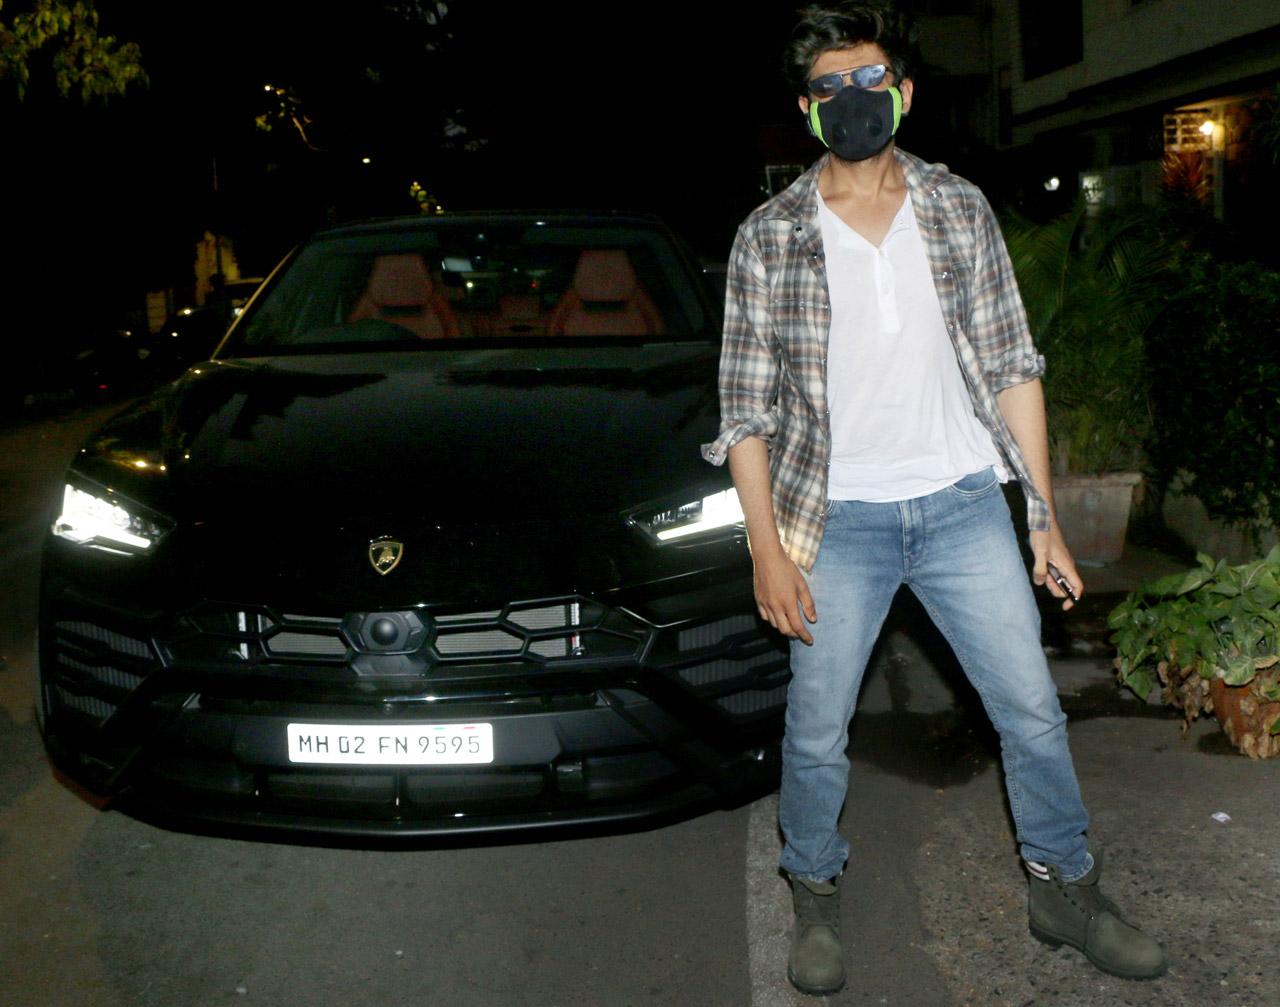 Proud owner of swanky Lamborghini worth Rs 4.5 crore, Kartik Aaryan was clicked posing with this hot new wheels near his residence in Juhu.